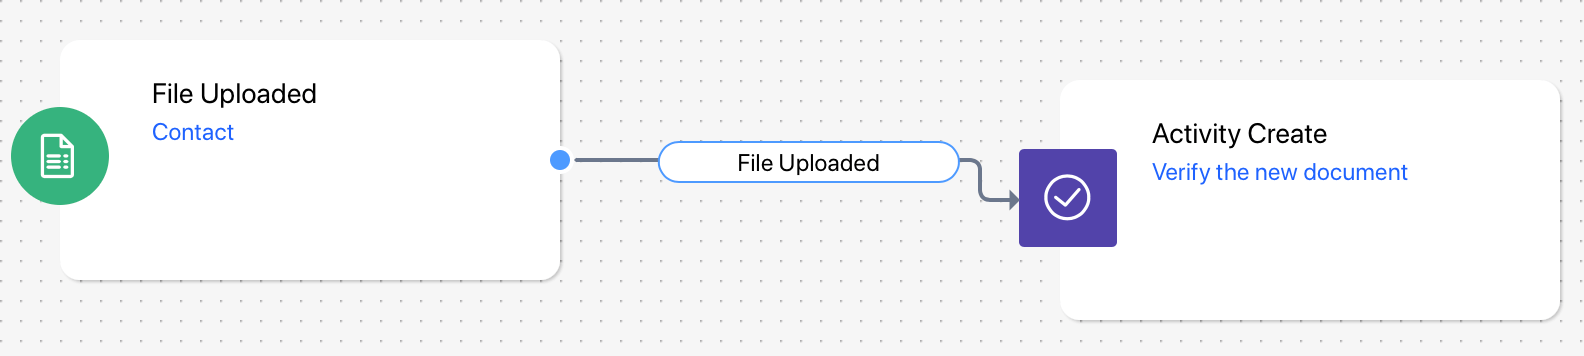 file_use_case.png